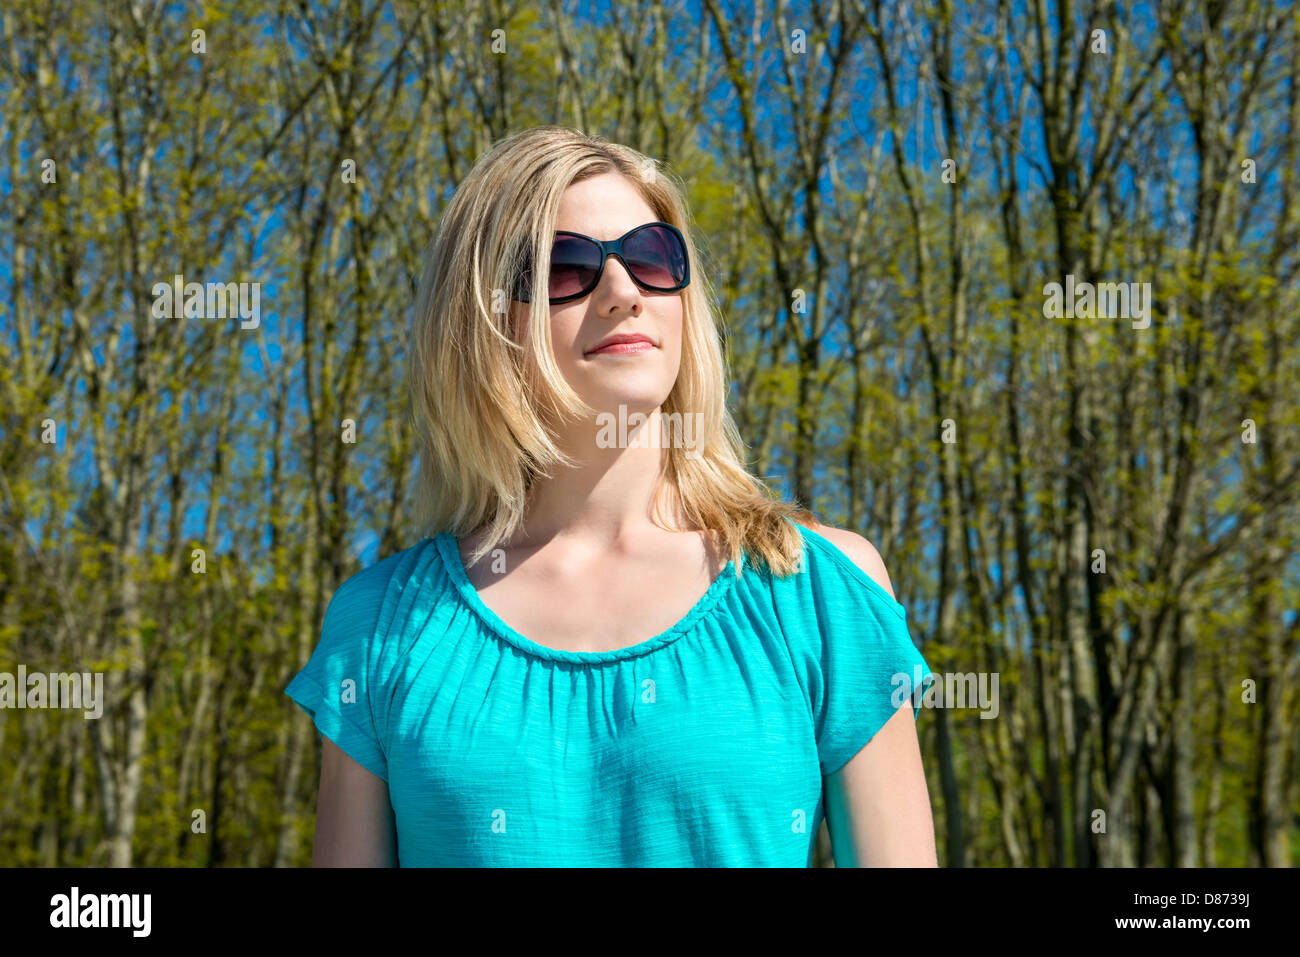 Front view of beautiful young woman wearing sunglasses standing against trees Stock Photo